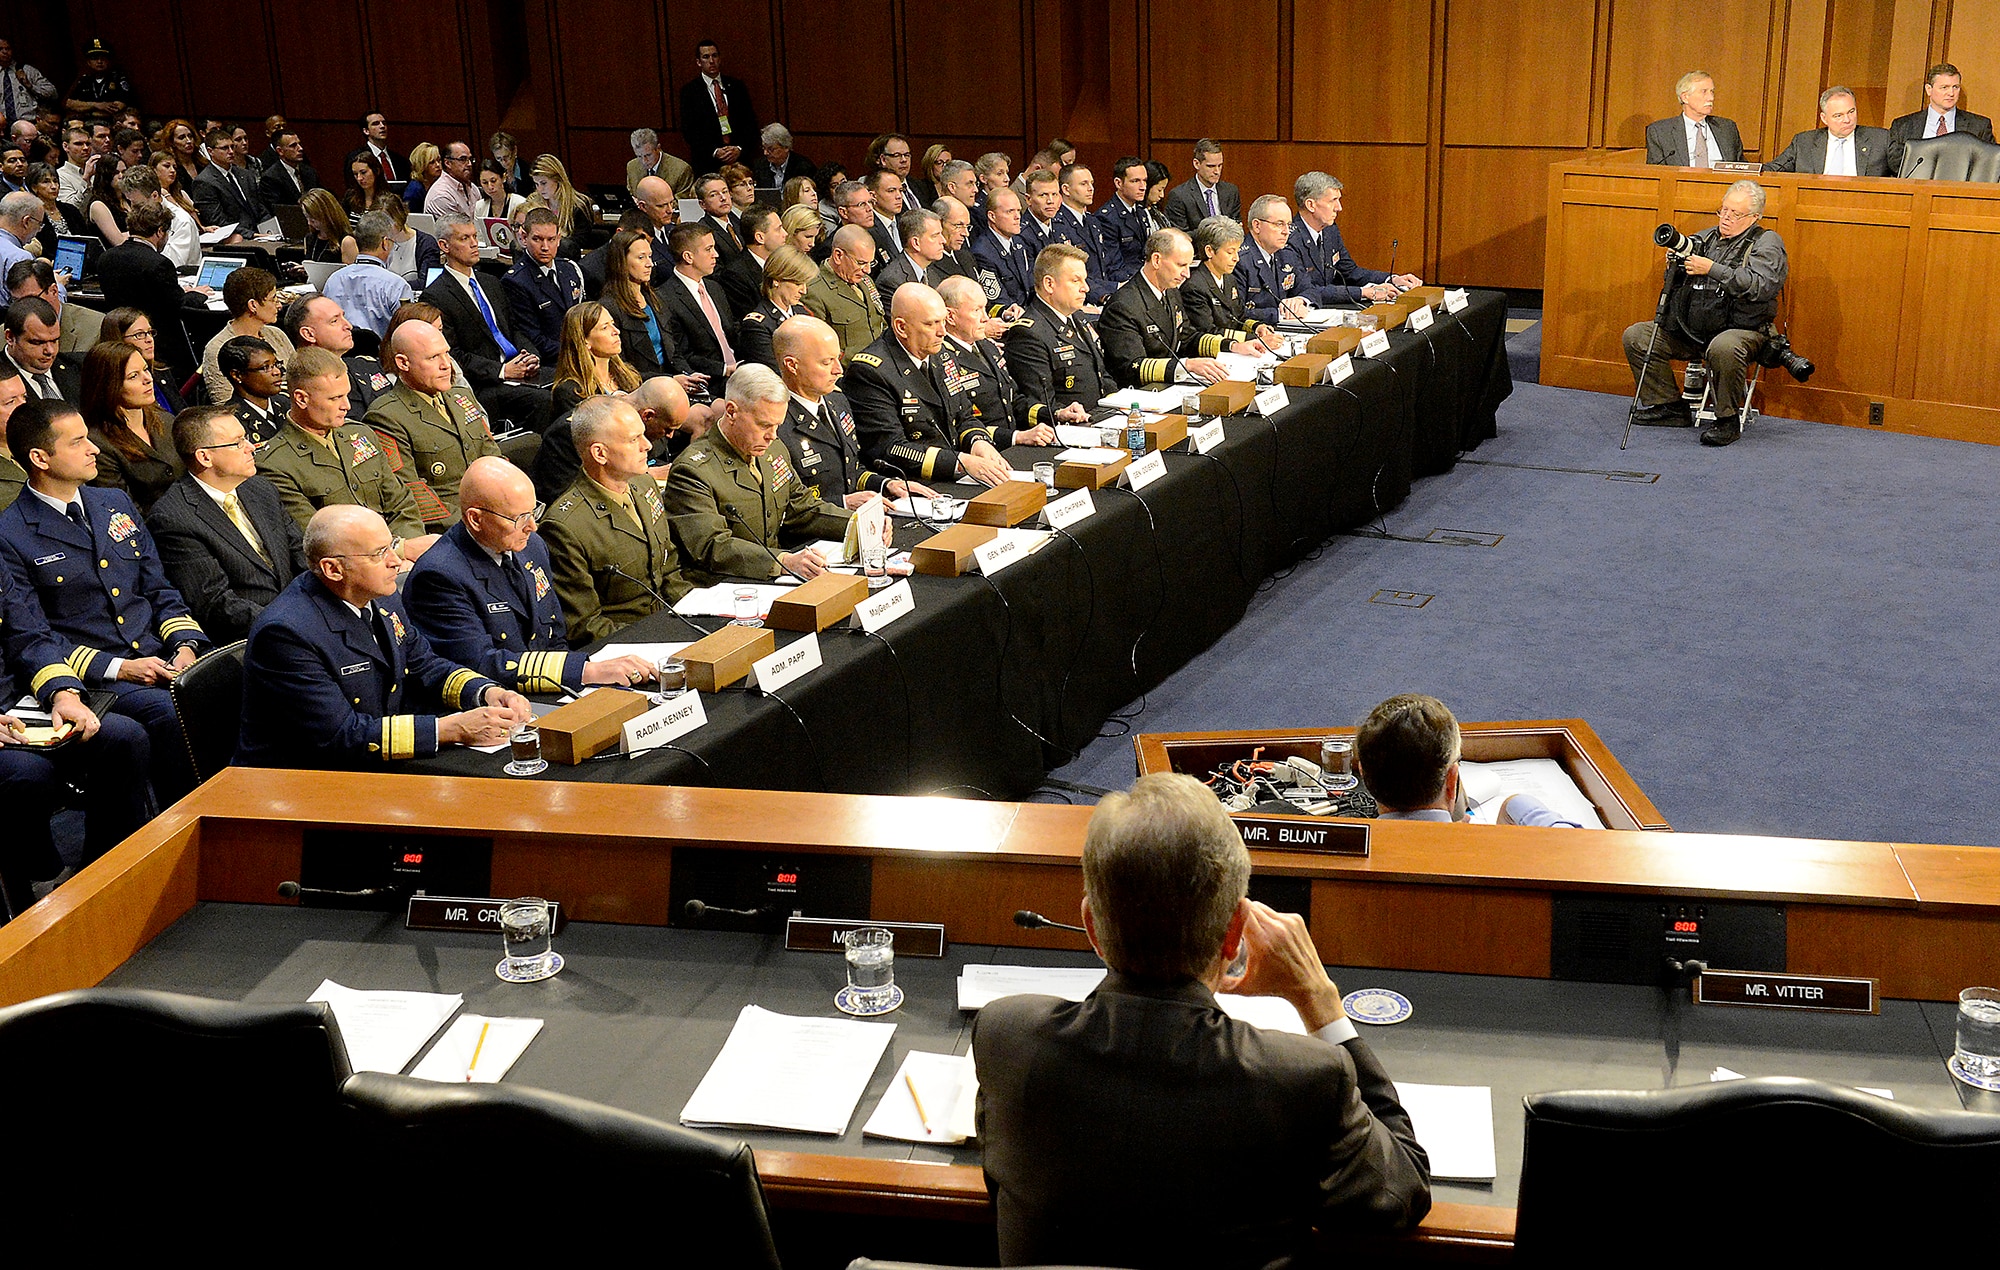 Air Force Chief of Staff Gen. Mark A. Welsh III and the Judge Advocate General Lt. Gen. Richard Harding appear before the Senate Armed Services Committee June 4, 2013, in Washington, D.C. During the hearing they testified alongside the chairman of the Joint Chiefs of Staff and the service chiefs from the other branches about combating sexual assault in the military. (U.S. Air Force photo/Scott M. Ash)
